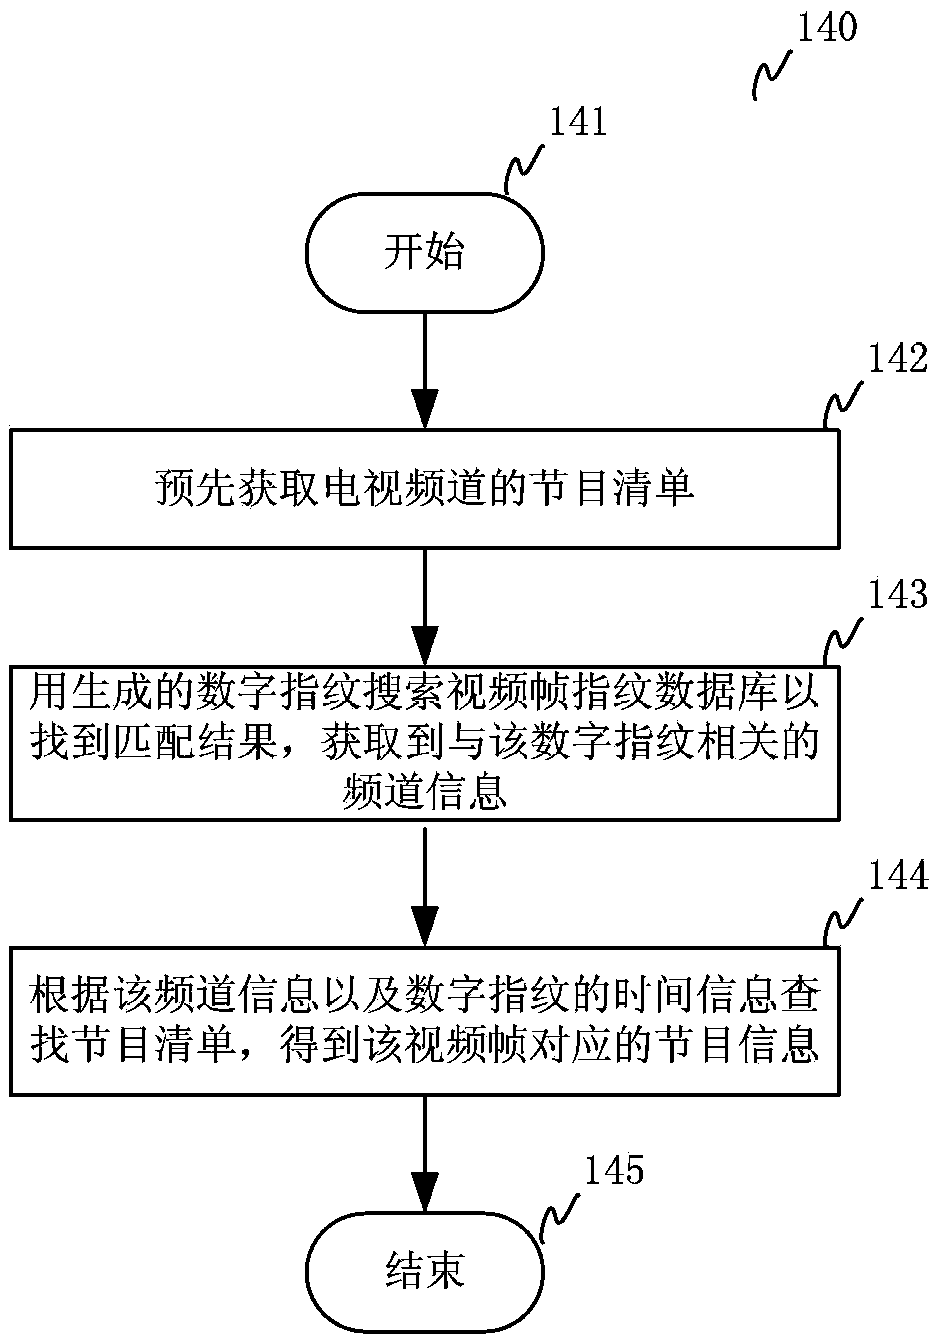 Method and system for recognizing video program